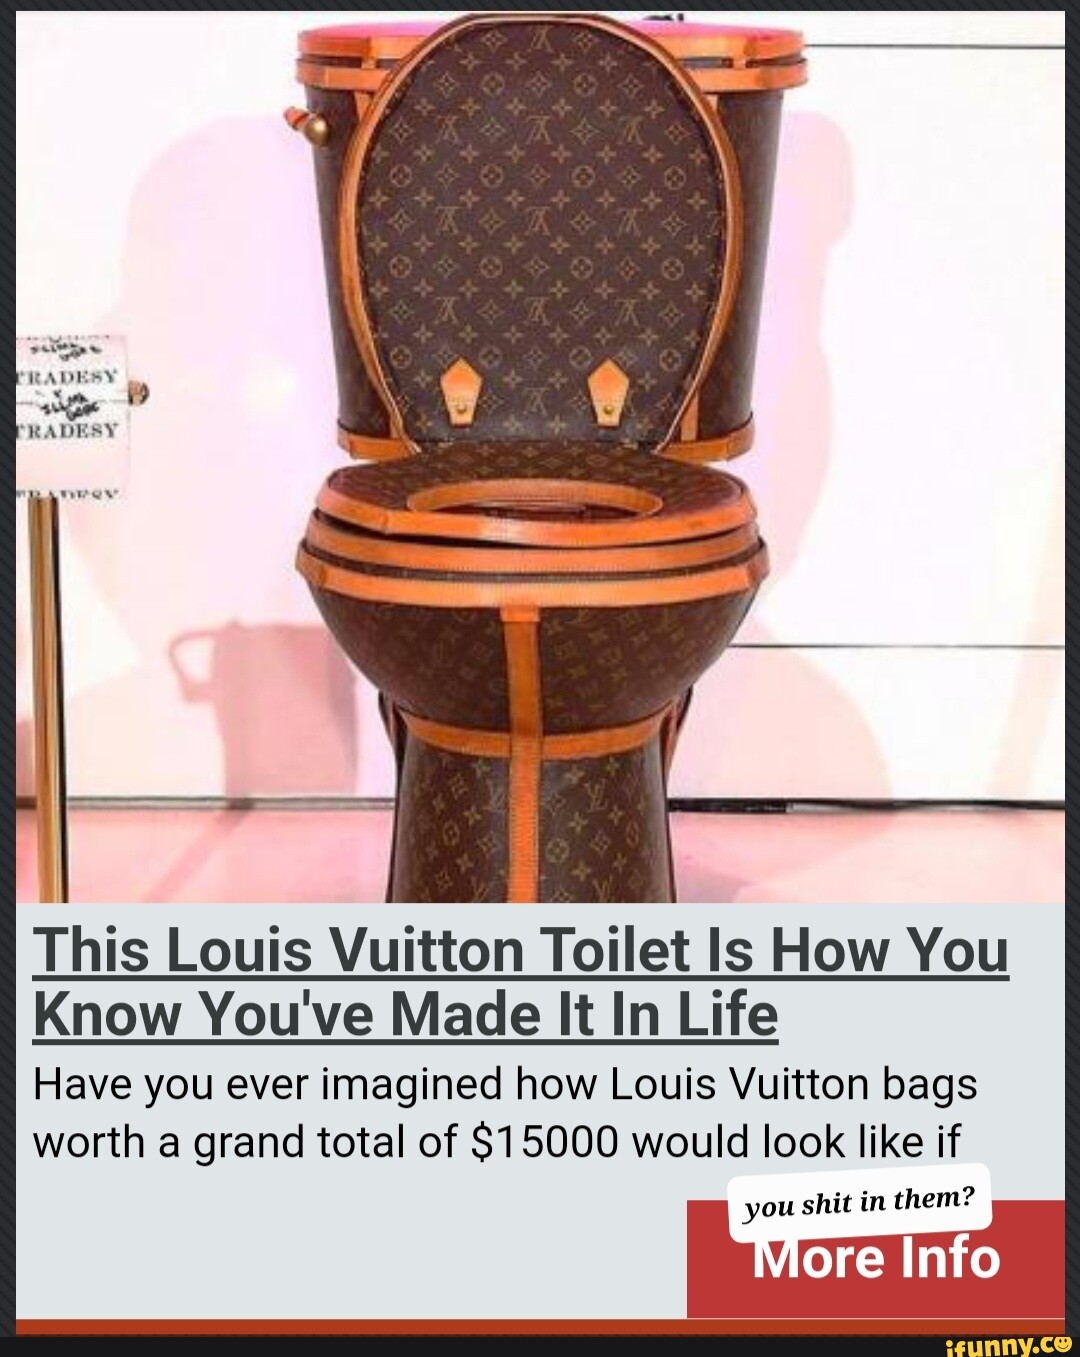 In Venice the pollution has a reduced so much that the Louis Vuitton bags  are starting to swim again meme  MemeZilacom